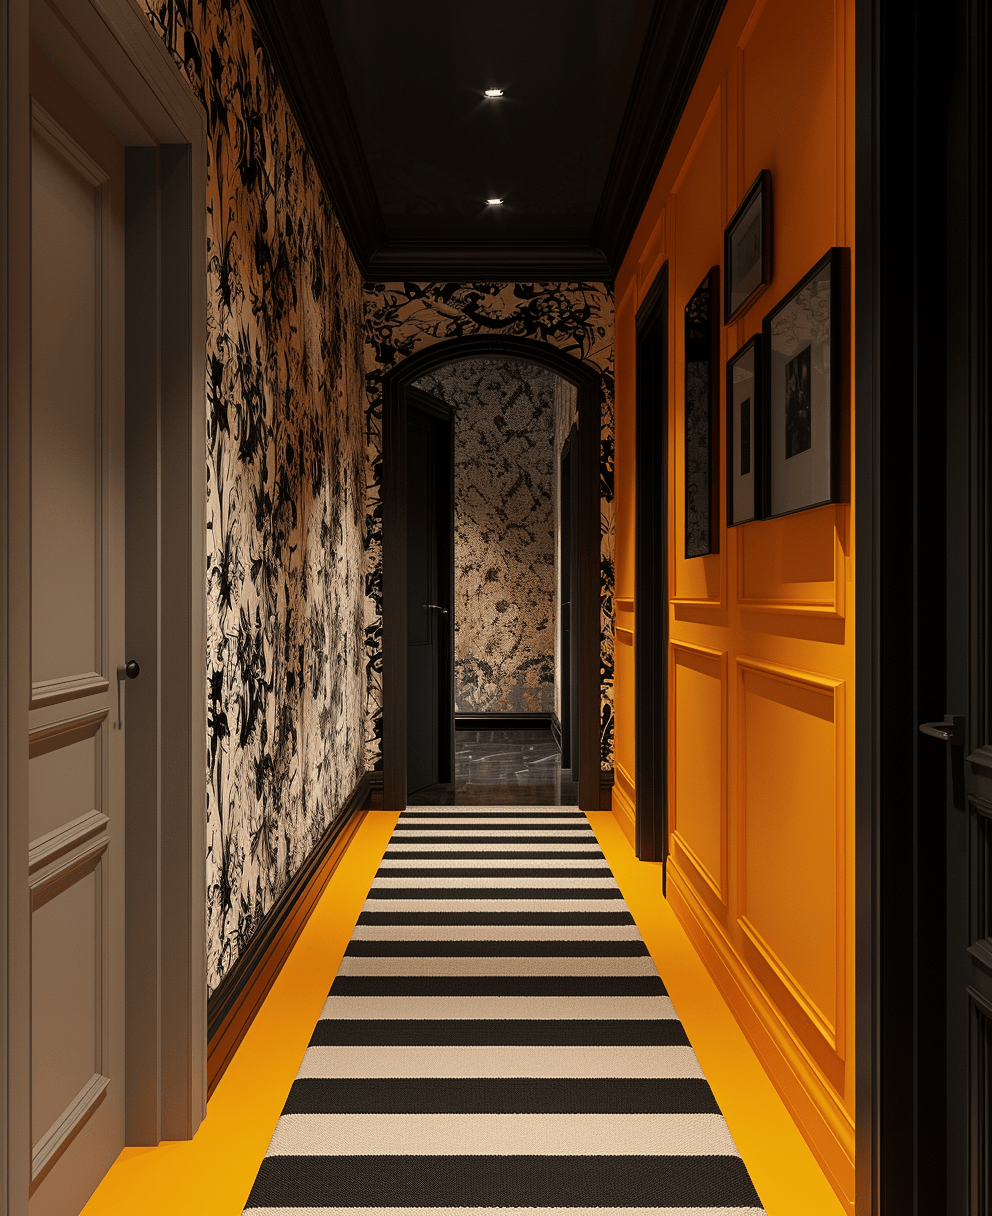 a Warmly lit Art Deco hallway with layered lighting fixtures and frosted glass elements